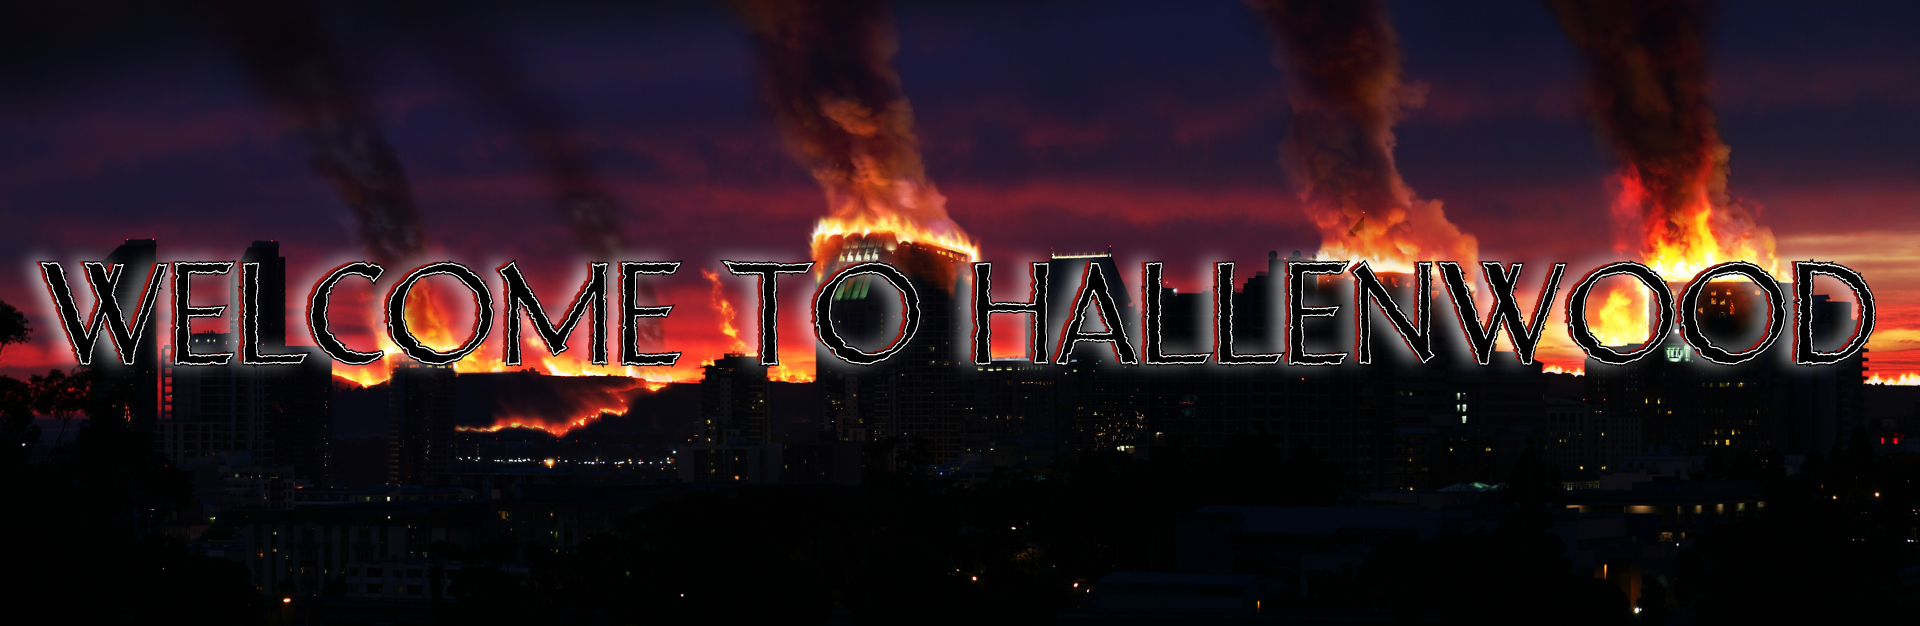 A city at night with many buildings caught in a blazing fire. In front of the scene it says, "Welcome to Hallenwood."